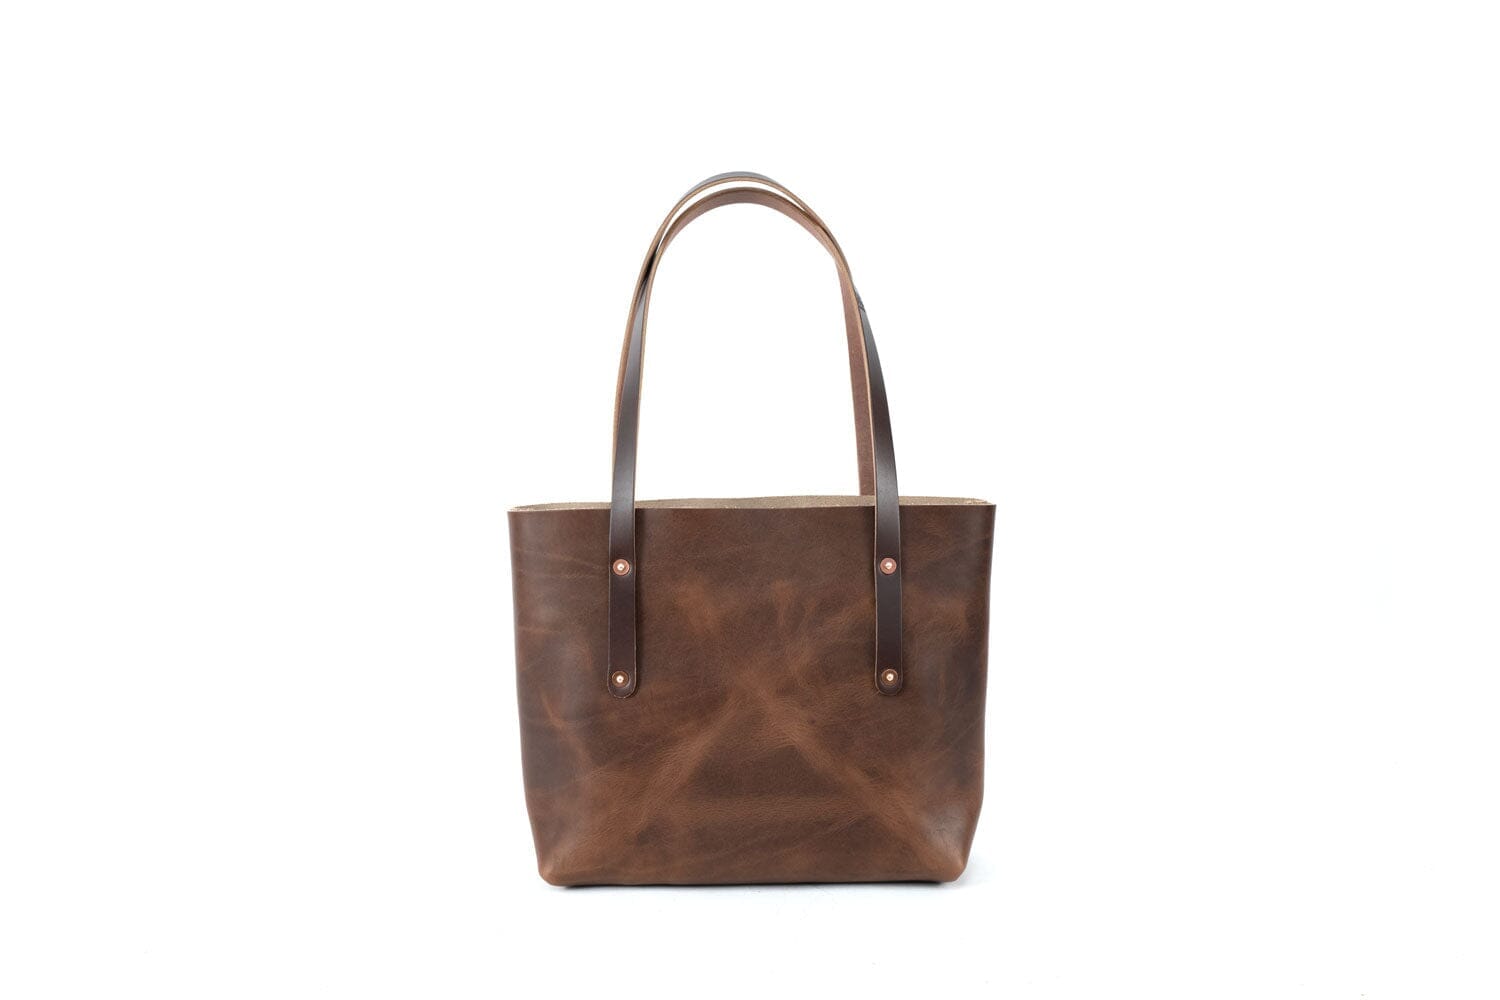 AVERY LEATHER TOTE BAG - SMALL - RUSTIC PECAN (RTS)